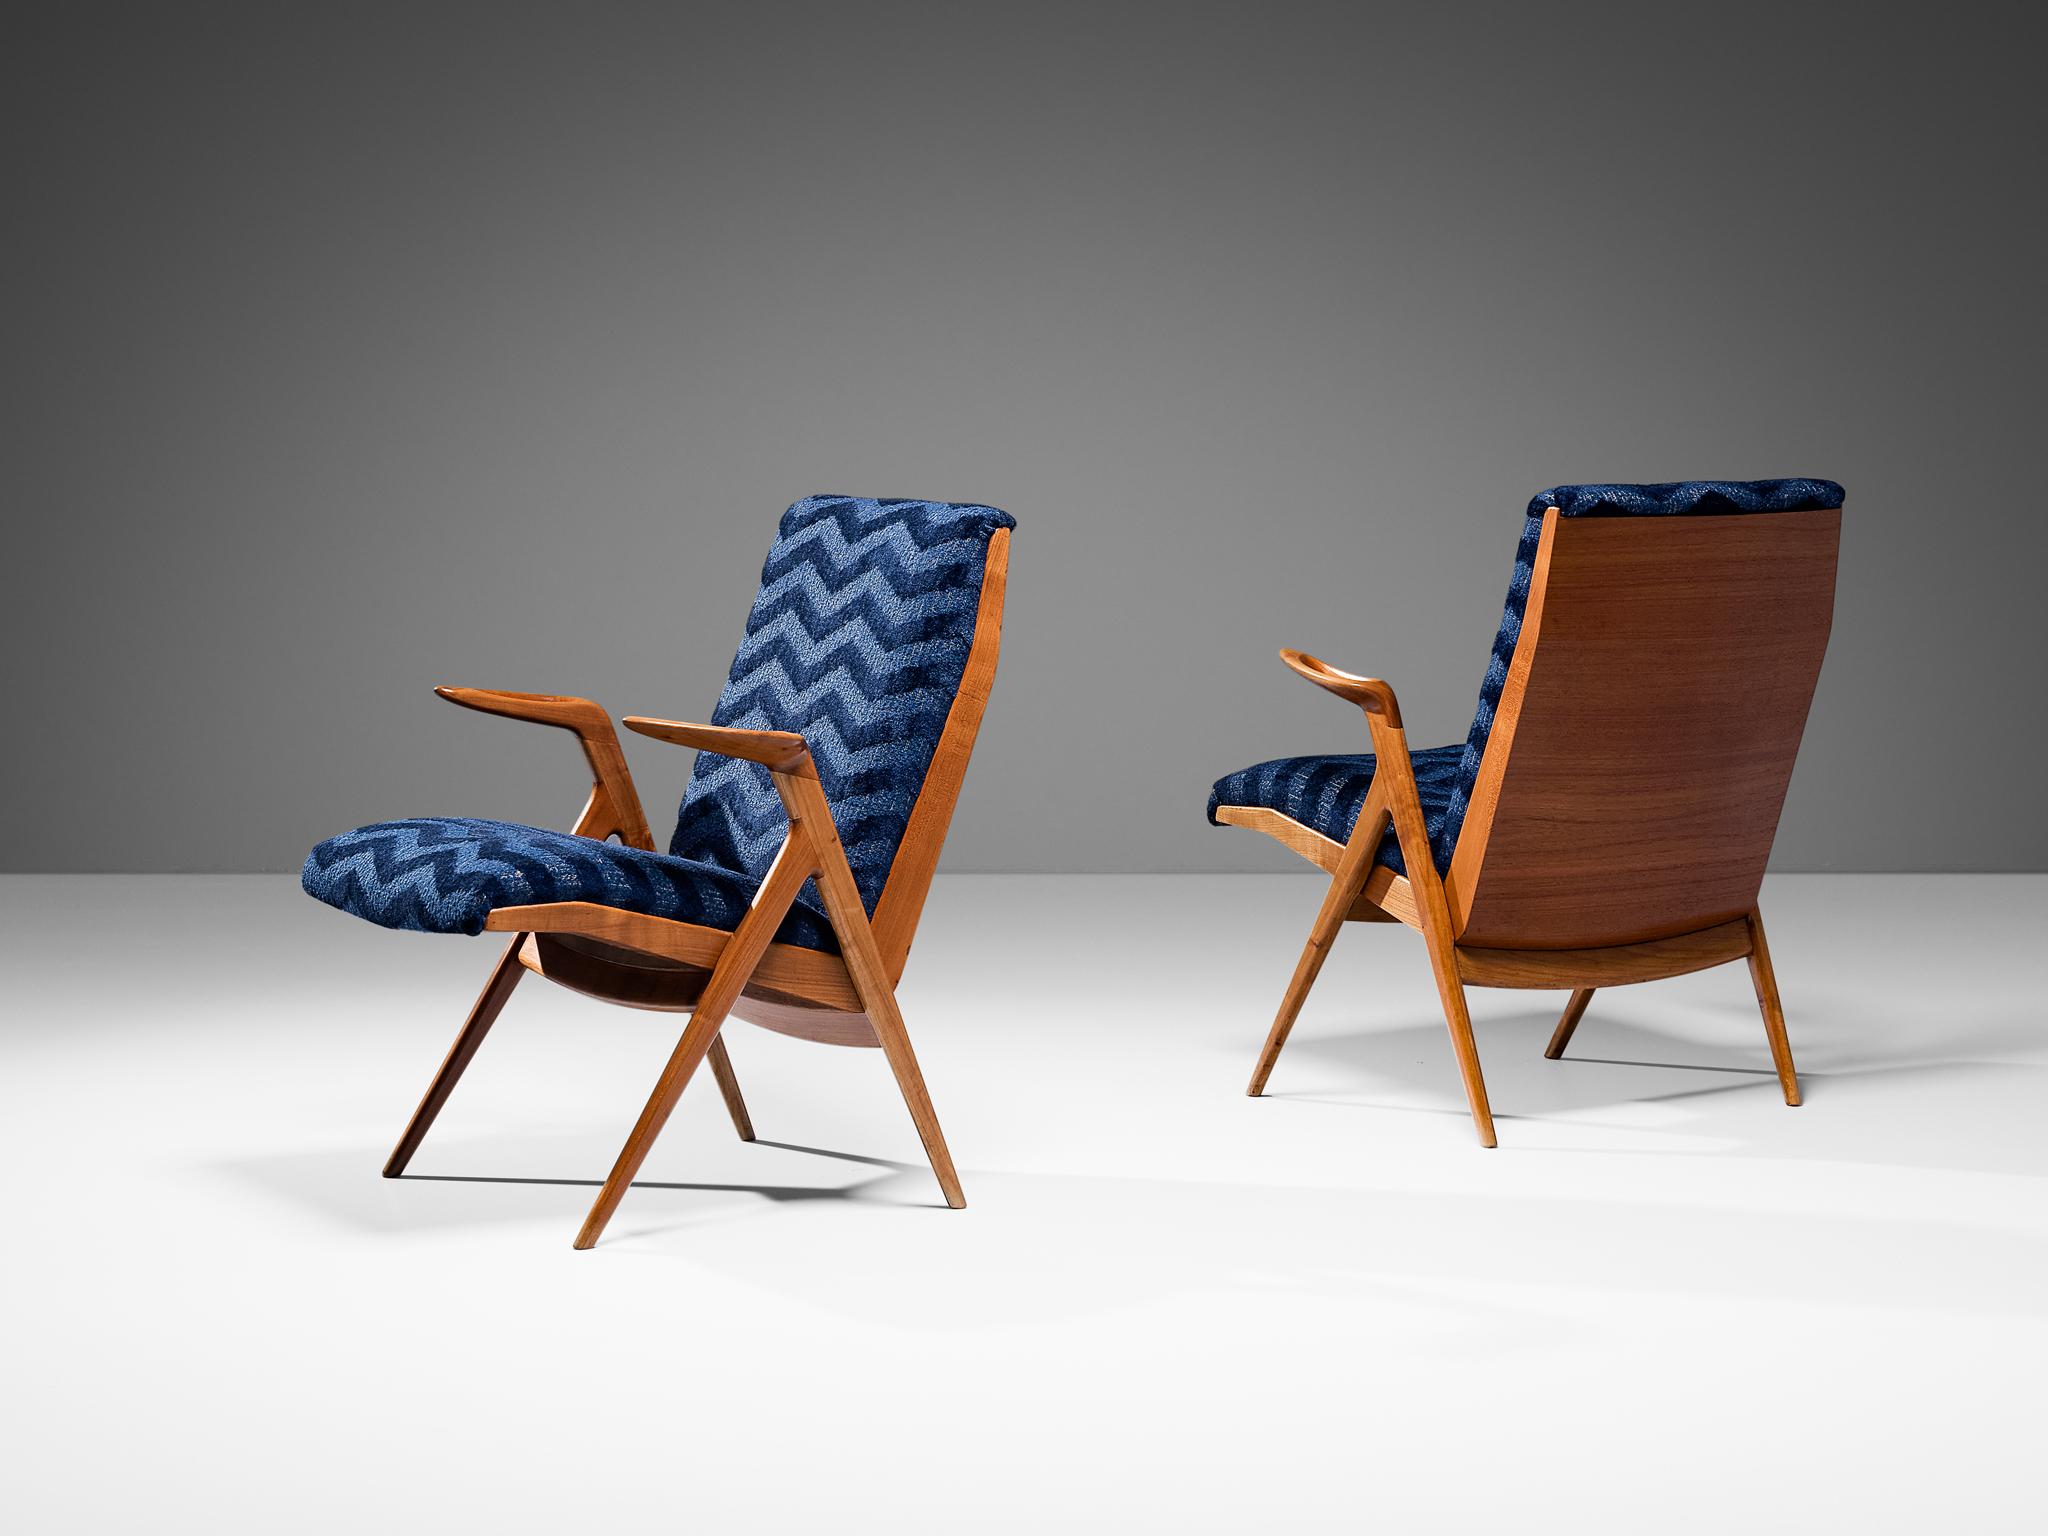 Taichiro Nakay (Nakai) for La Permanente Mobili La Permanente Mobili Cantù, pair of armchairs, cherry, reupholstered in Evolution 21 - Toscane Blue - 12, Italy, 1955

Taichiro Nakay is an incredibly talented Japanese designer who is mostly known for